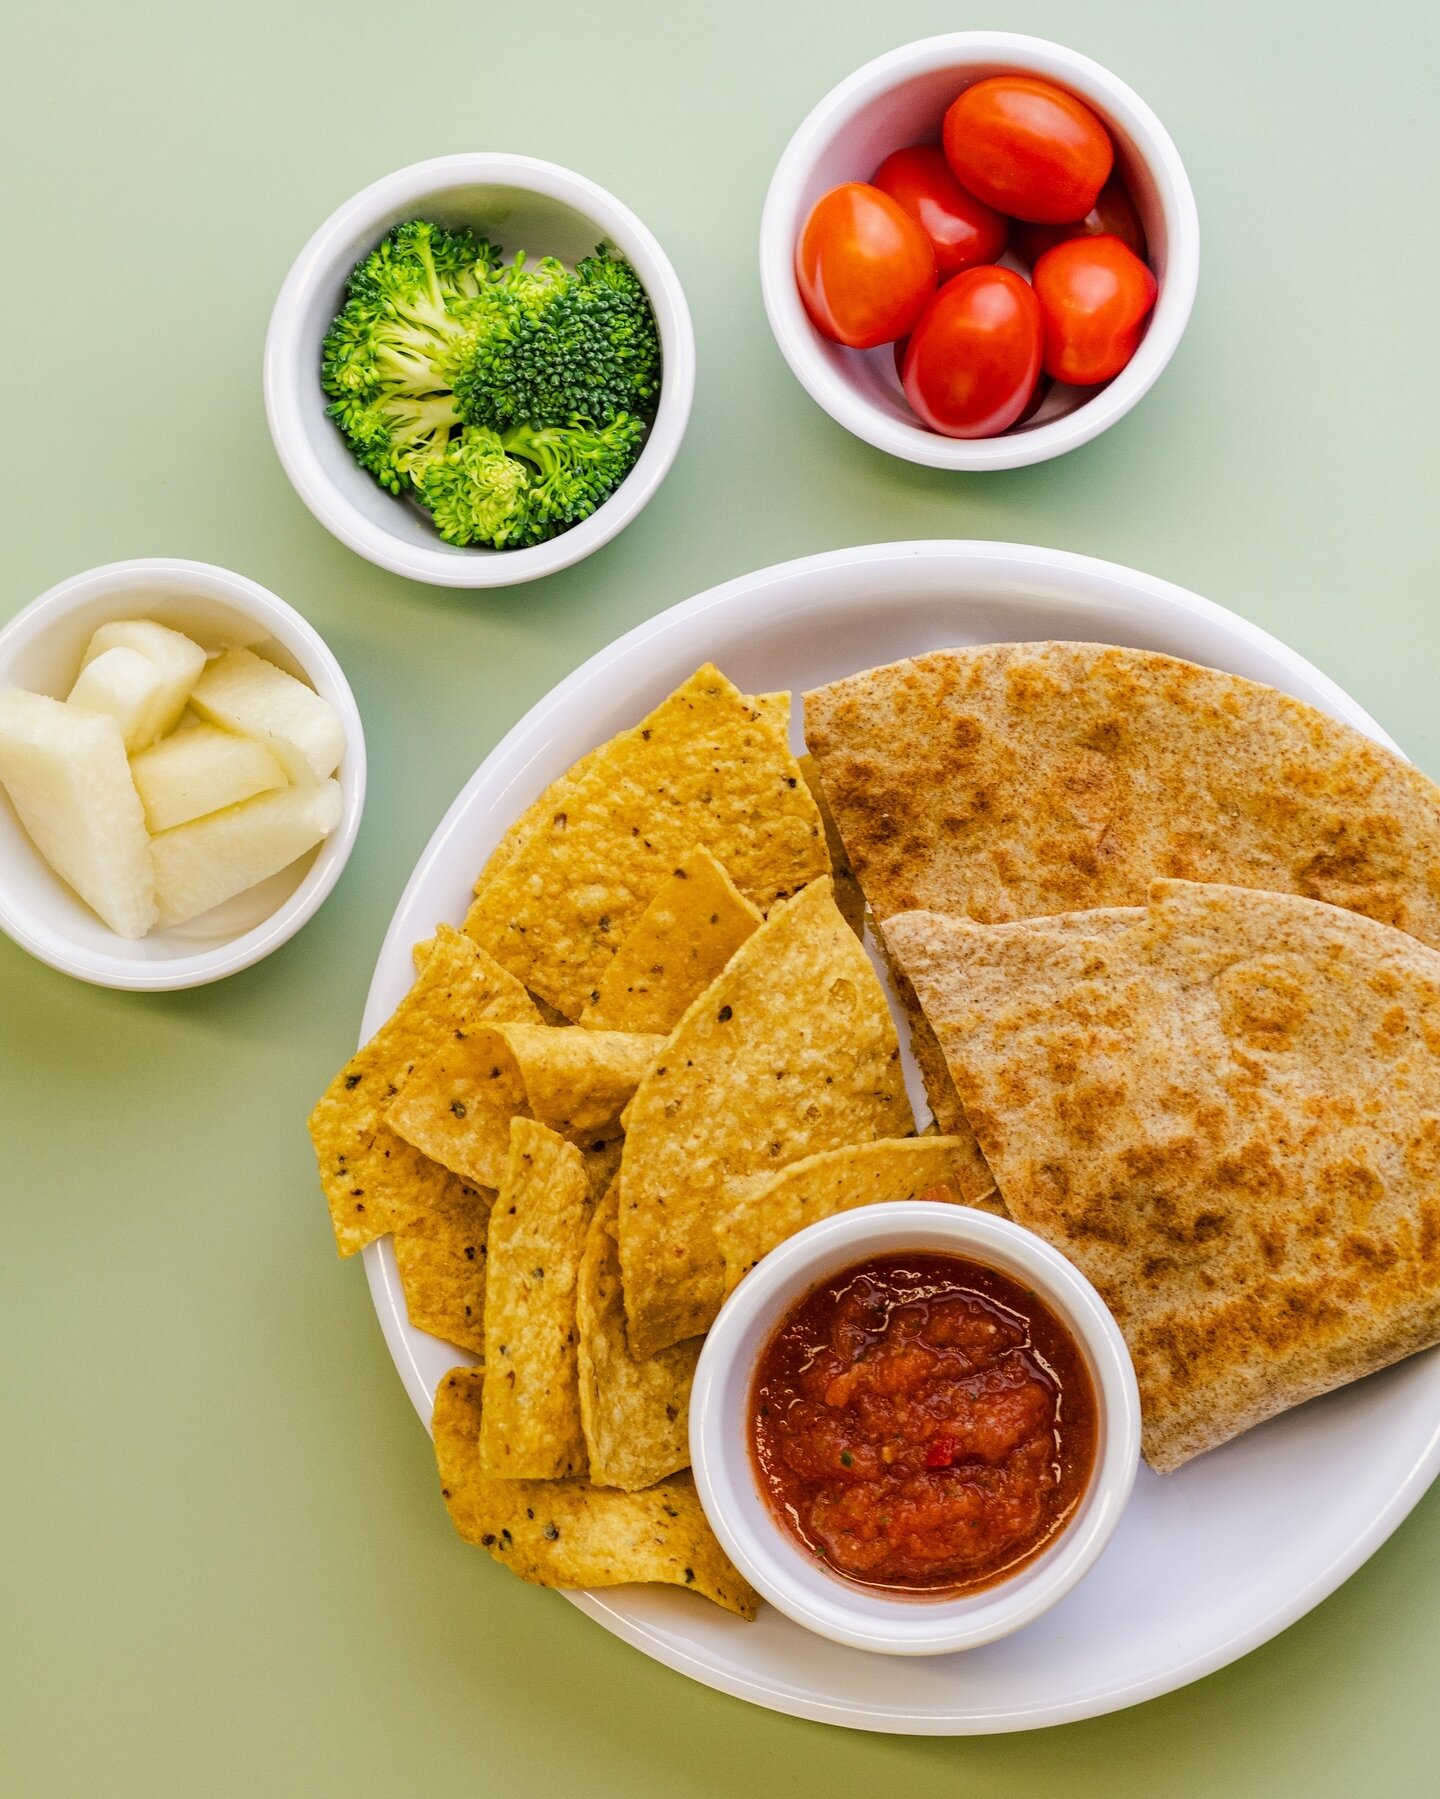 Another delightful menu awaits our students today: savory chicken quesadillas, accompanied by crunchy chips and yummy salsa, all complemented by fresh fruits and vegetables. #PataSchool #SchoolKitchensWithAMission #ThePatachouFoundation